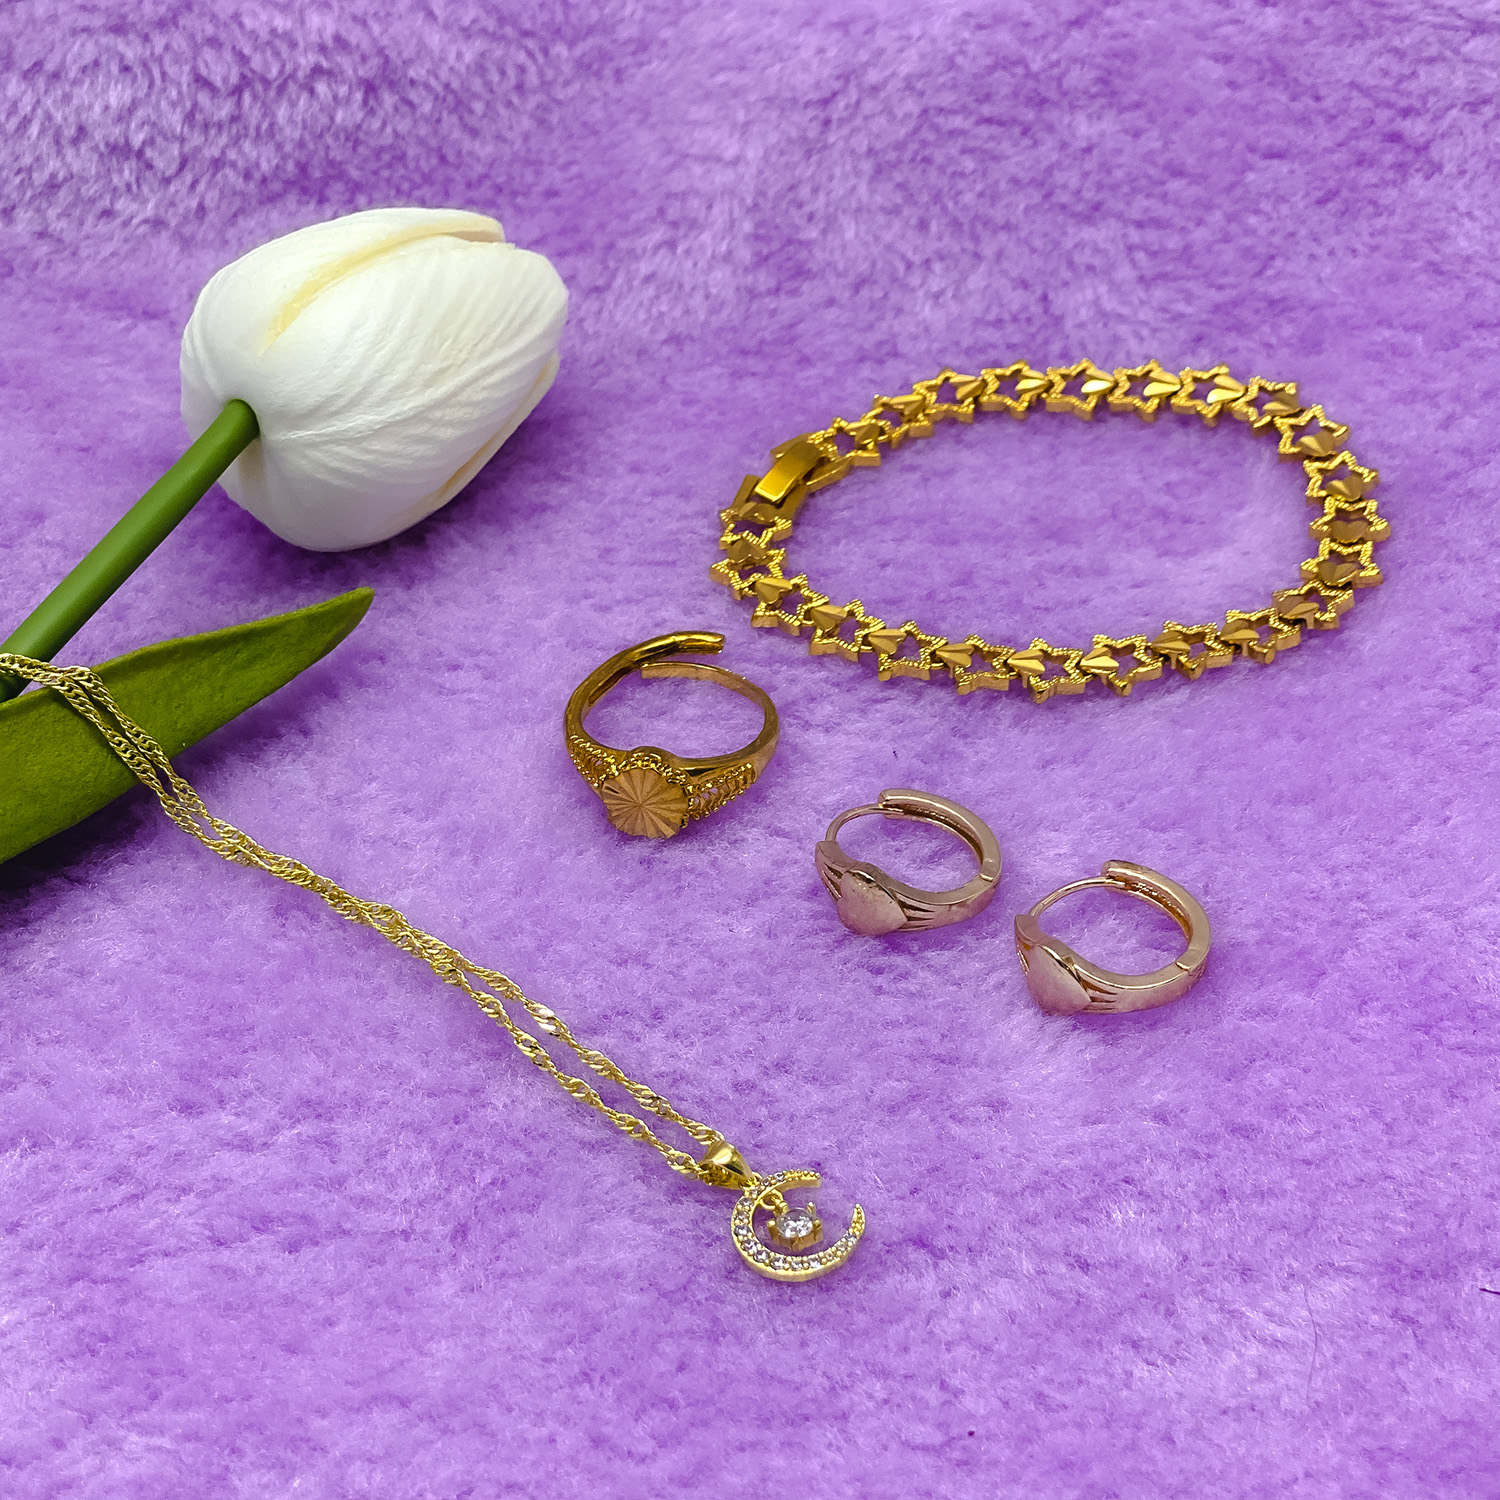 Shopee Finds Accessories Jewelry